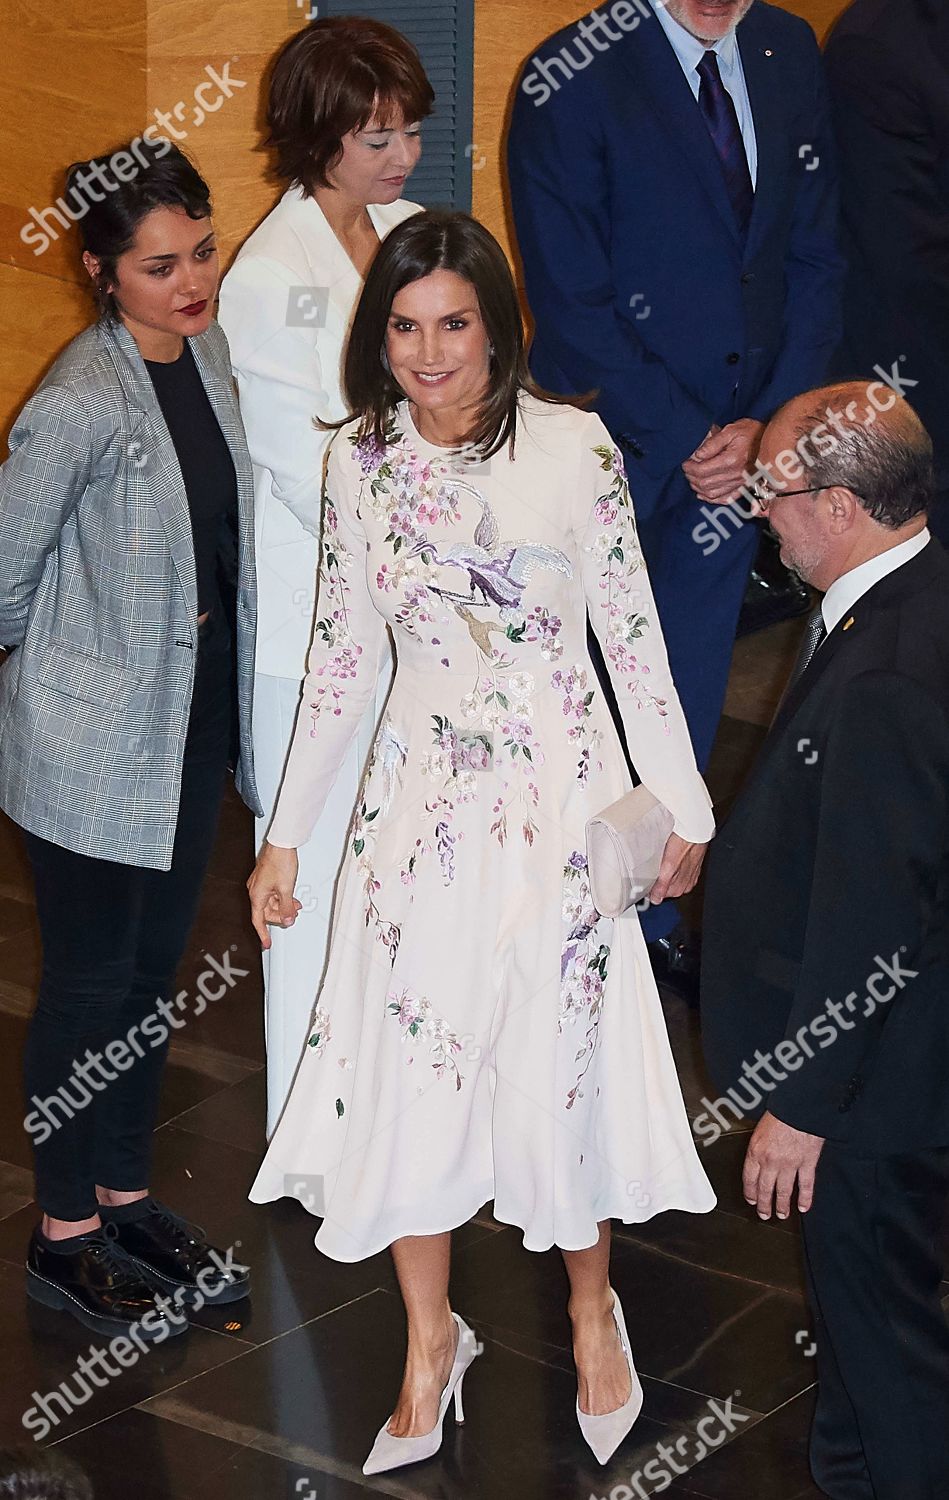 queen-letizia-attends-world-day-of-the-red-cross-and-red-crescent-zaragoza-spain-shutterstock-editorial-10230440a.jpg